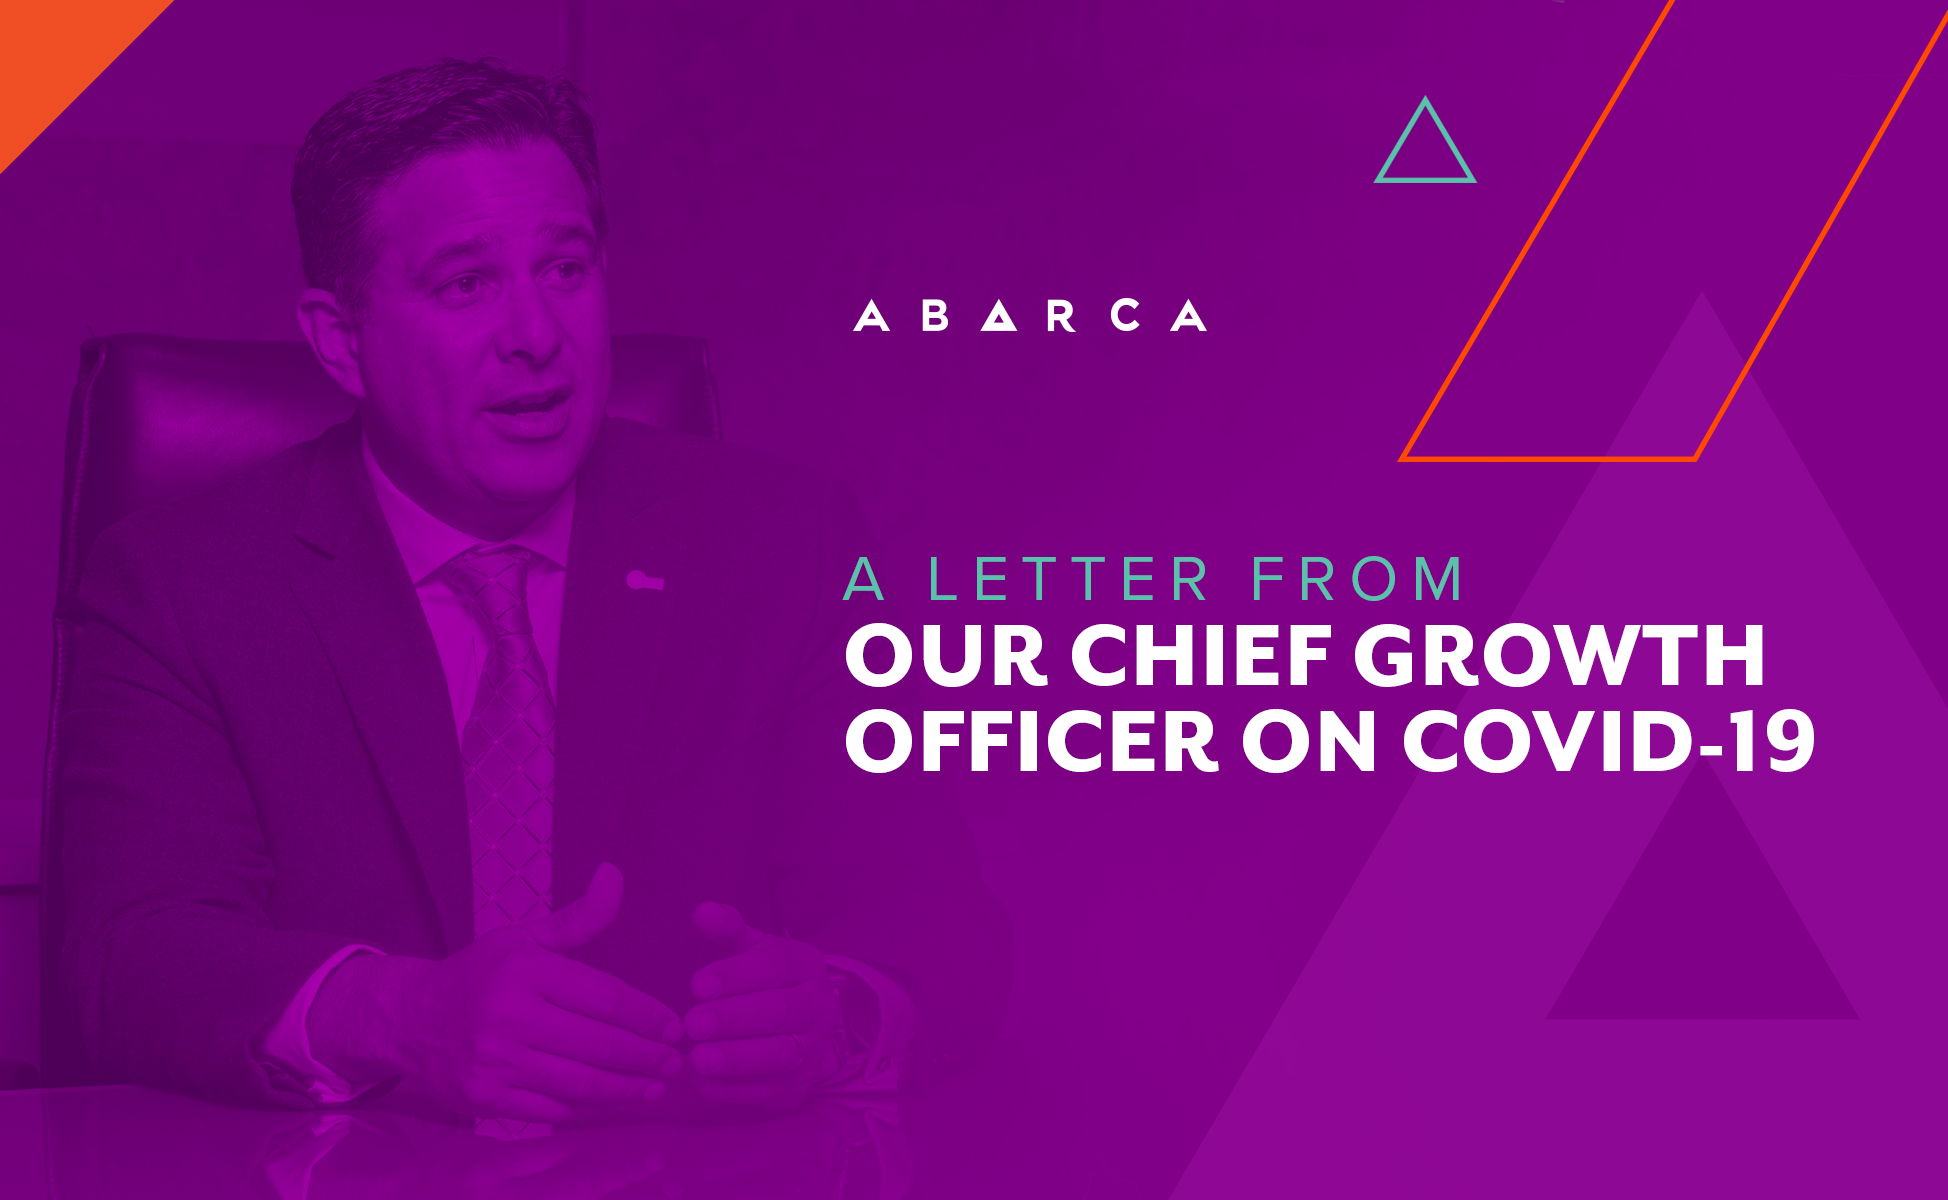 Abarca_Post_JavierGonzalez_A LETTER FROM OUR CHIEF GROWTH OFFICER ON COVID-19